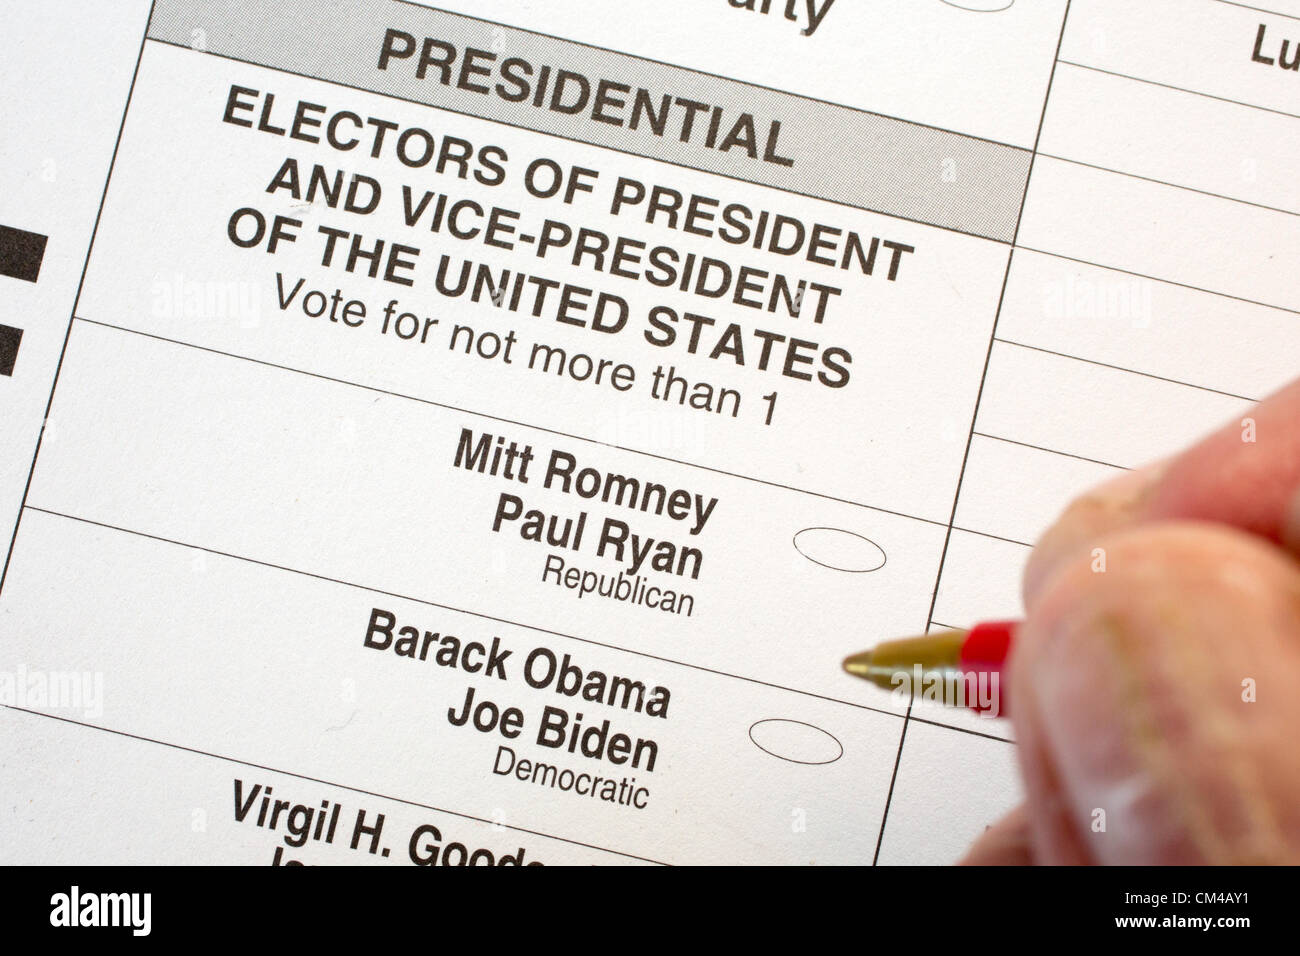 Detroit, Michigan - An absentee ballot in the 2012 U.S. presidential election. Stock Photo